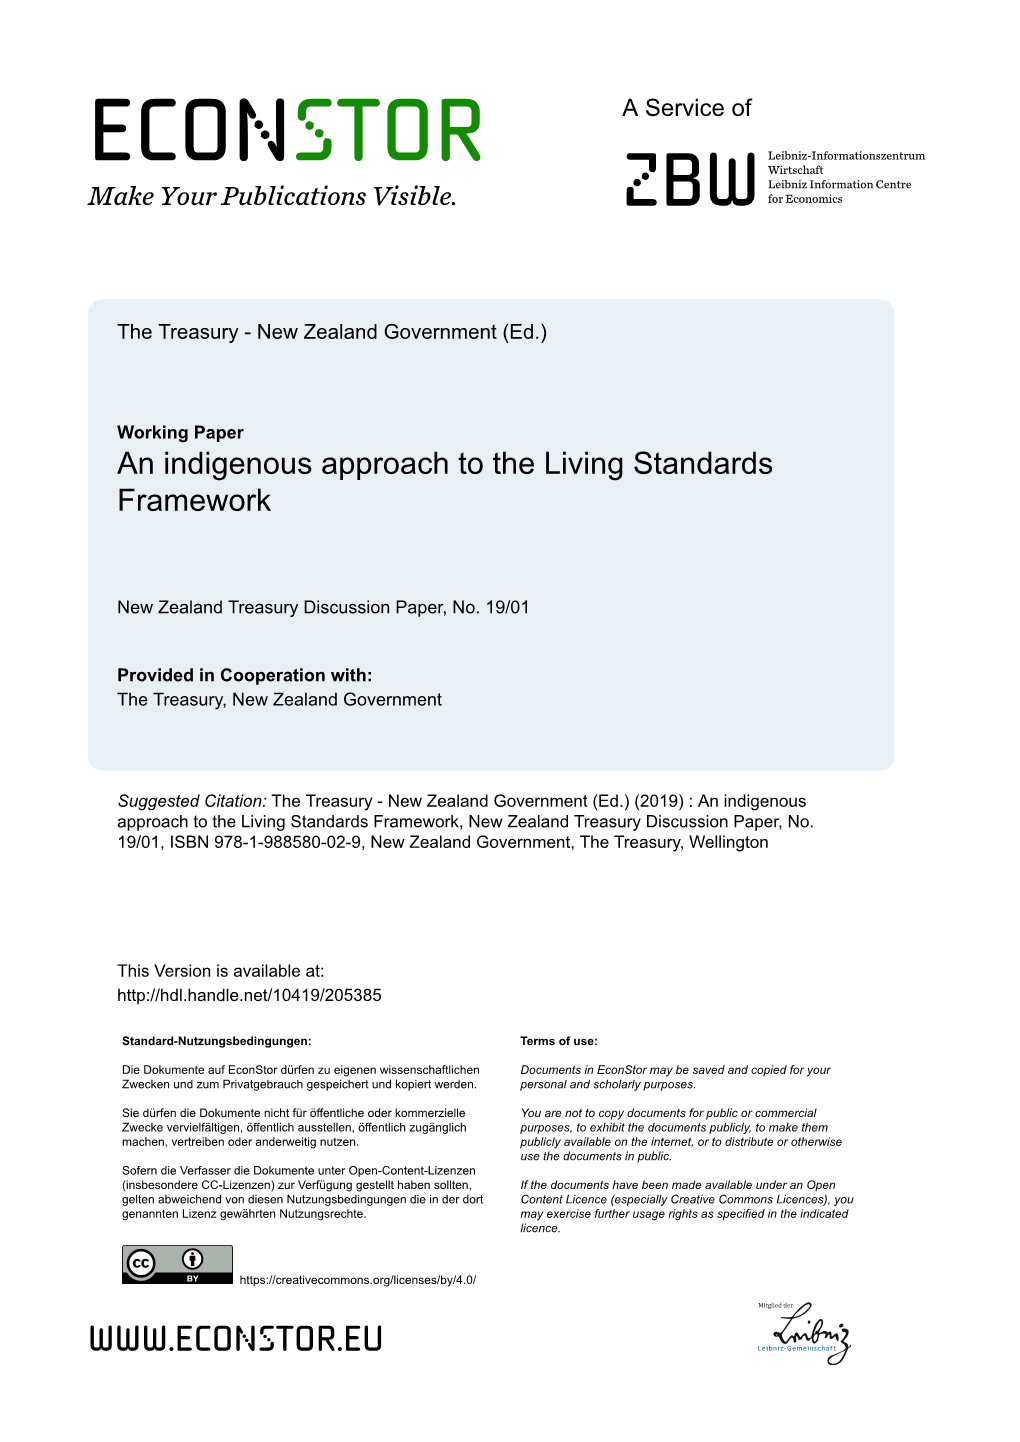 An Indigenous Approach to the Living Standards Framework